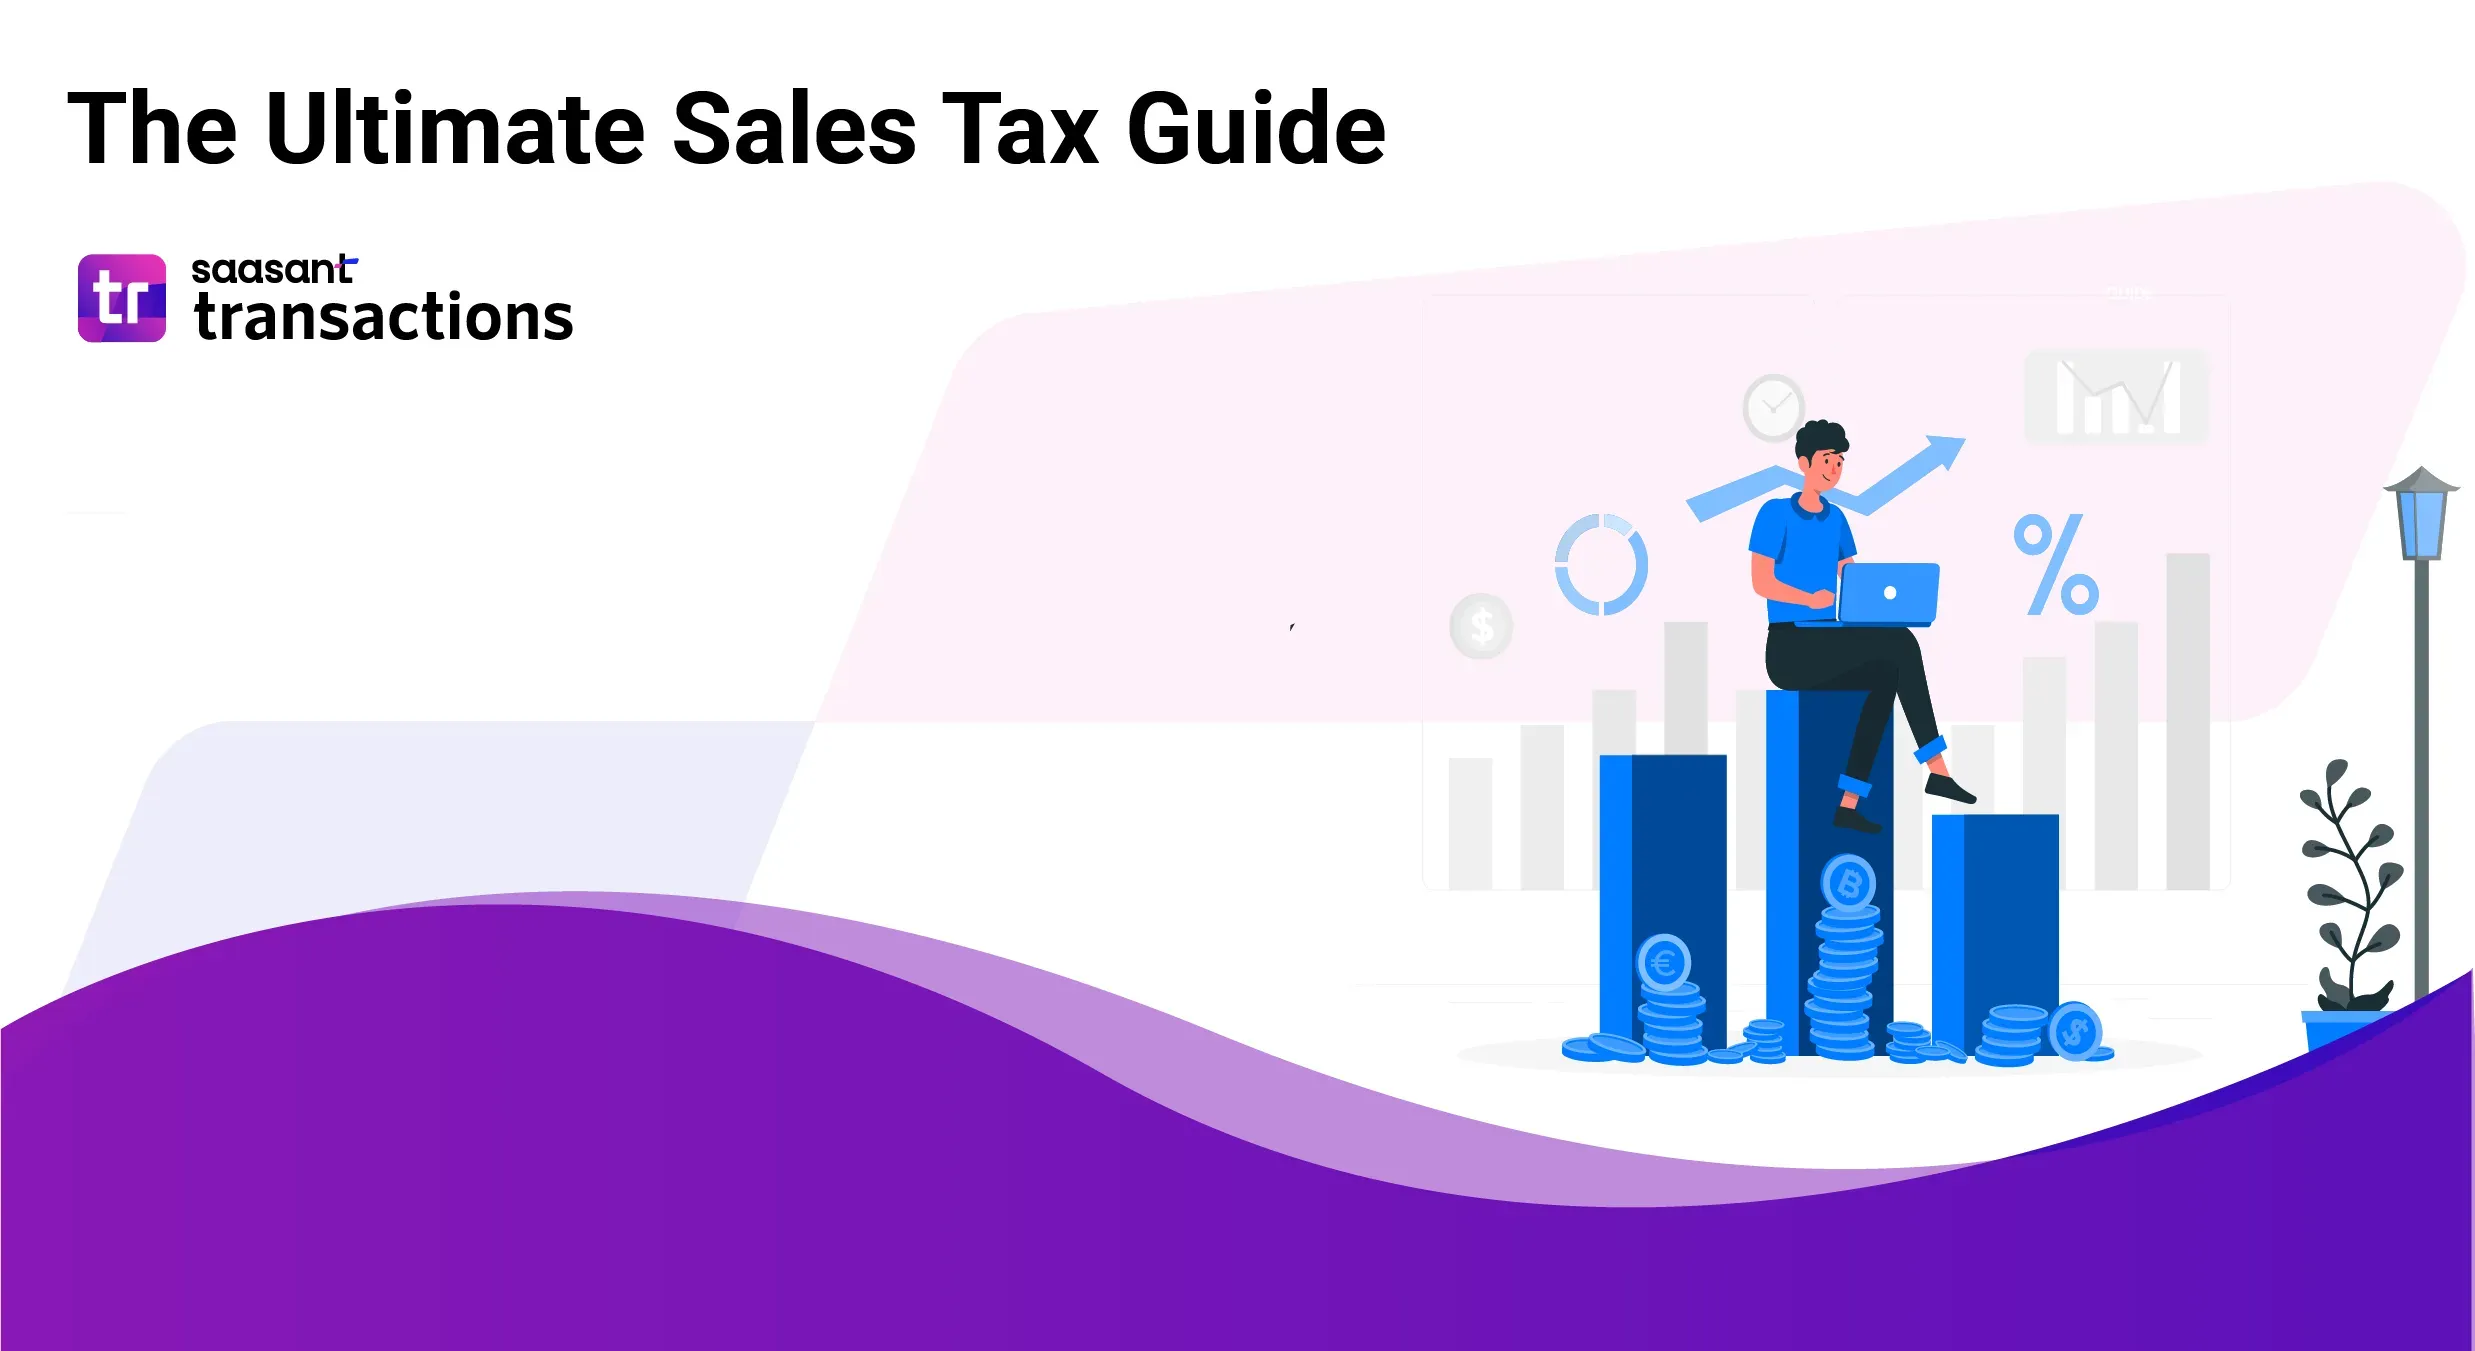 The Ultimate Sales Tax Guide For Small Businesses